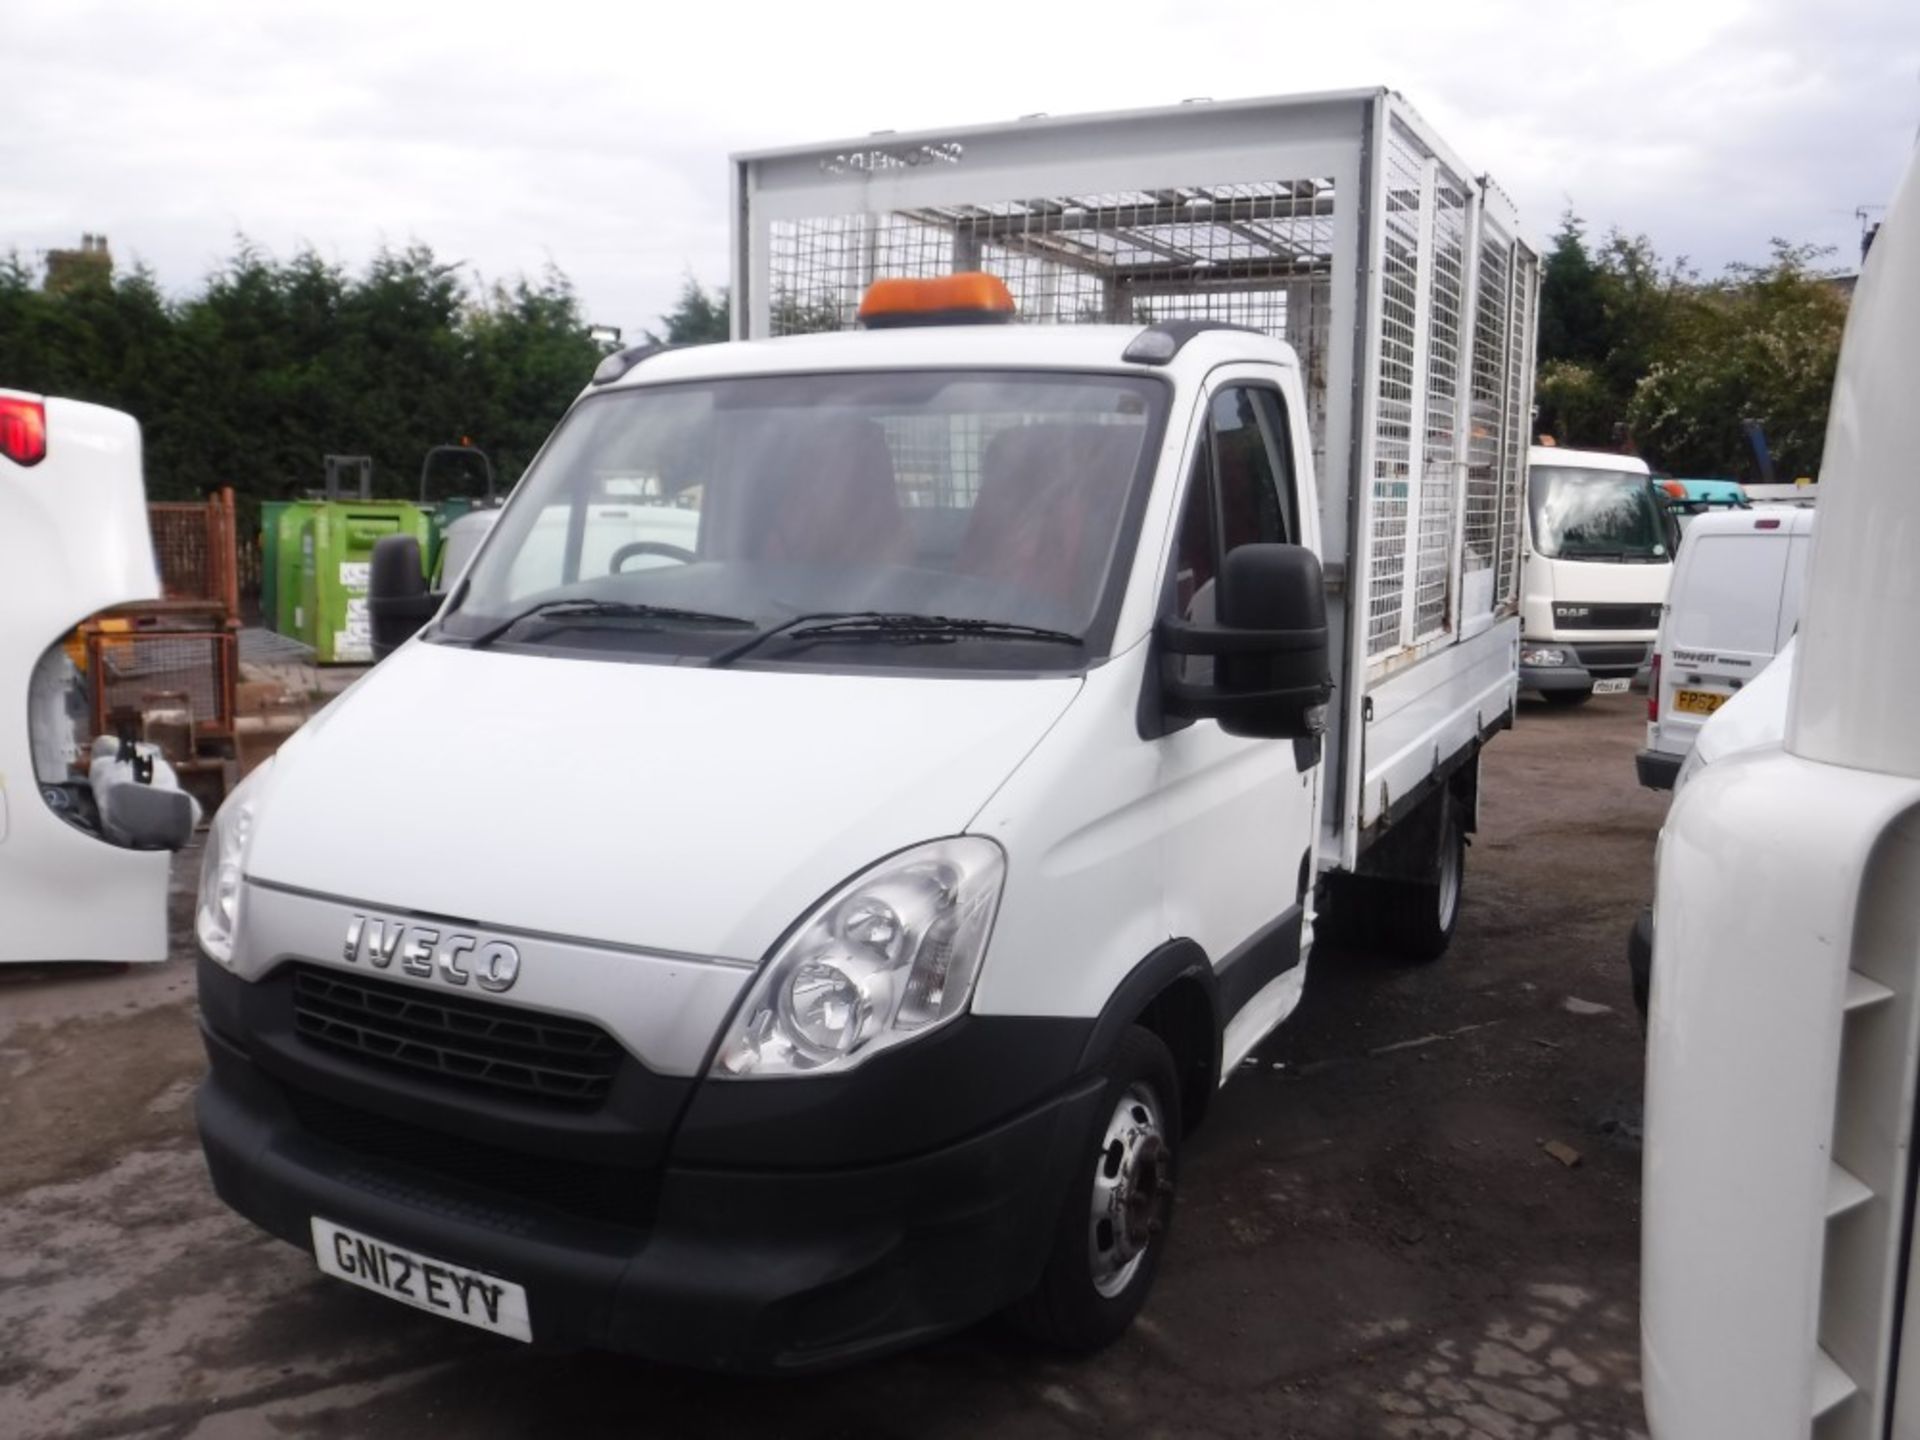 12 reg IVECO DAILY 35C11 MWB CAGED TIPPER, 1ST REG 04/12, TEST 04/19, 102241M, V5 HERE, 1 FORMER - Image 2 of 5